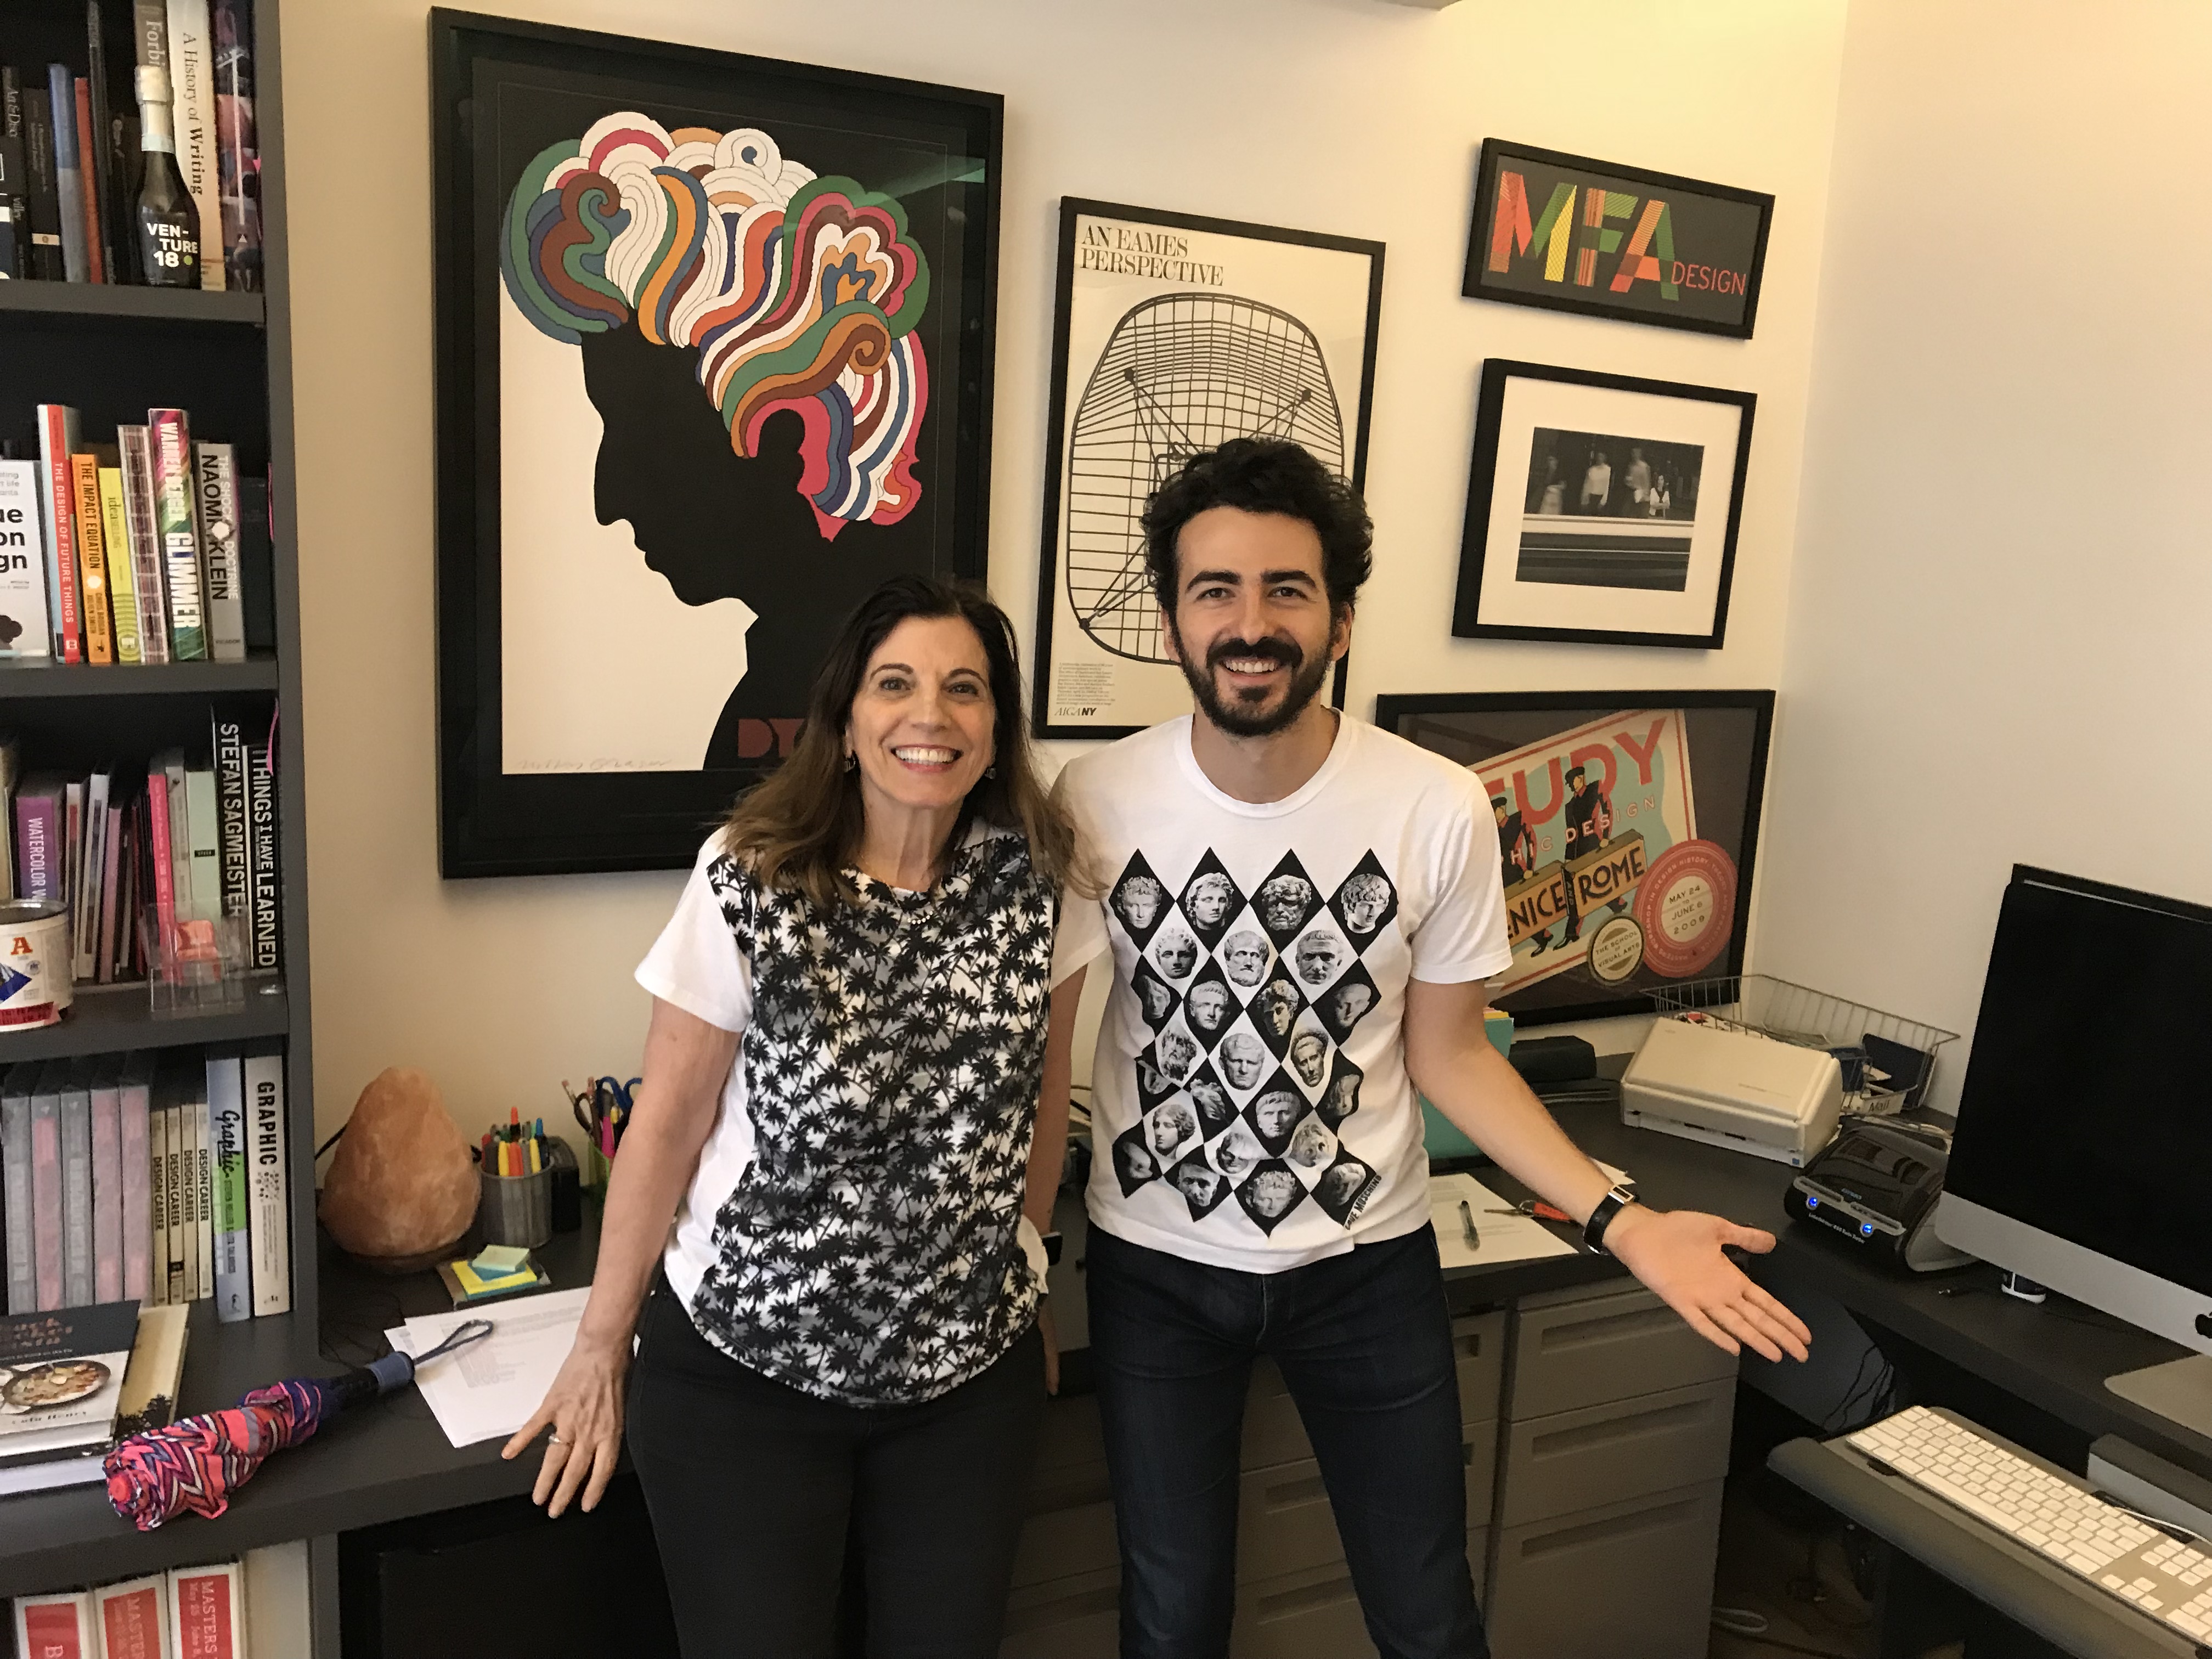 A photo of a man and a woman smiling in an office.